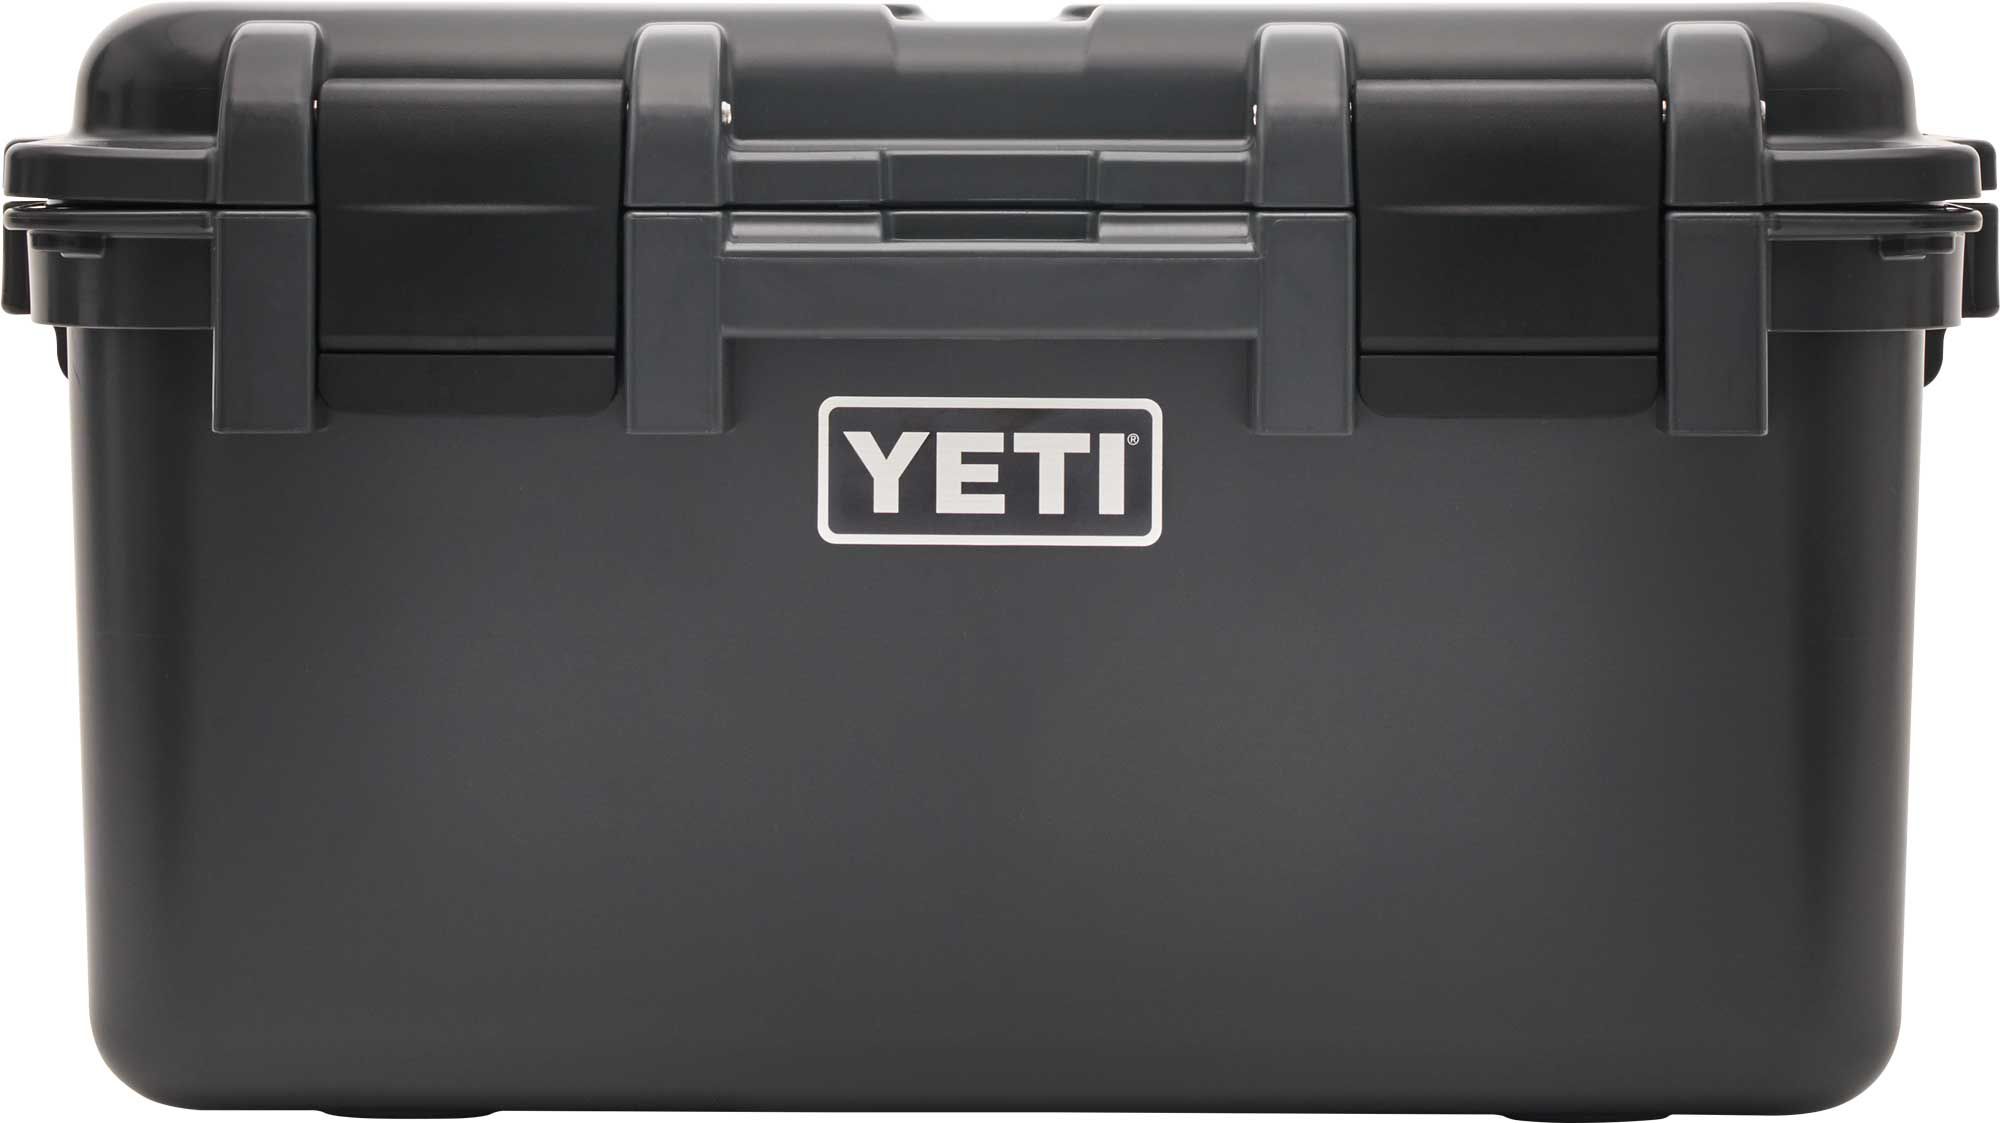 yeti load out